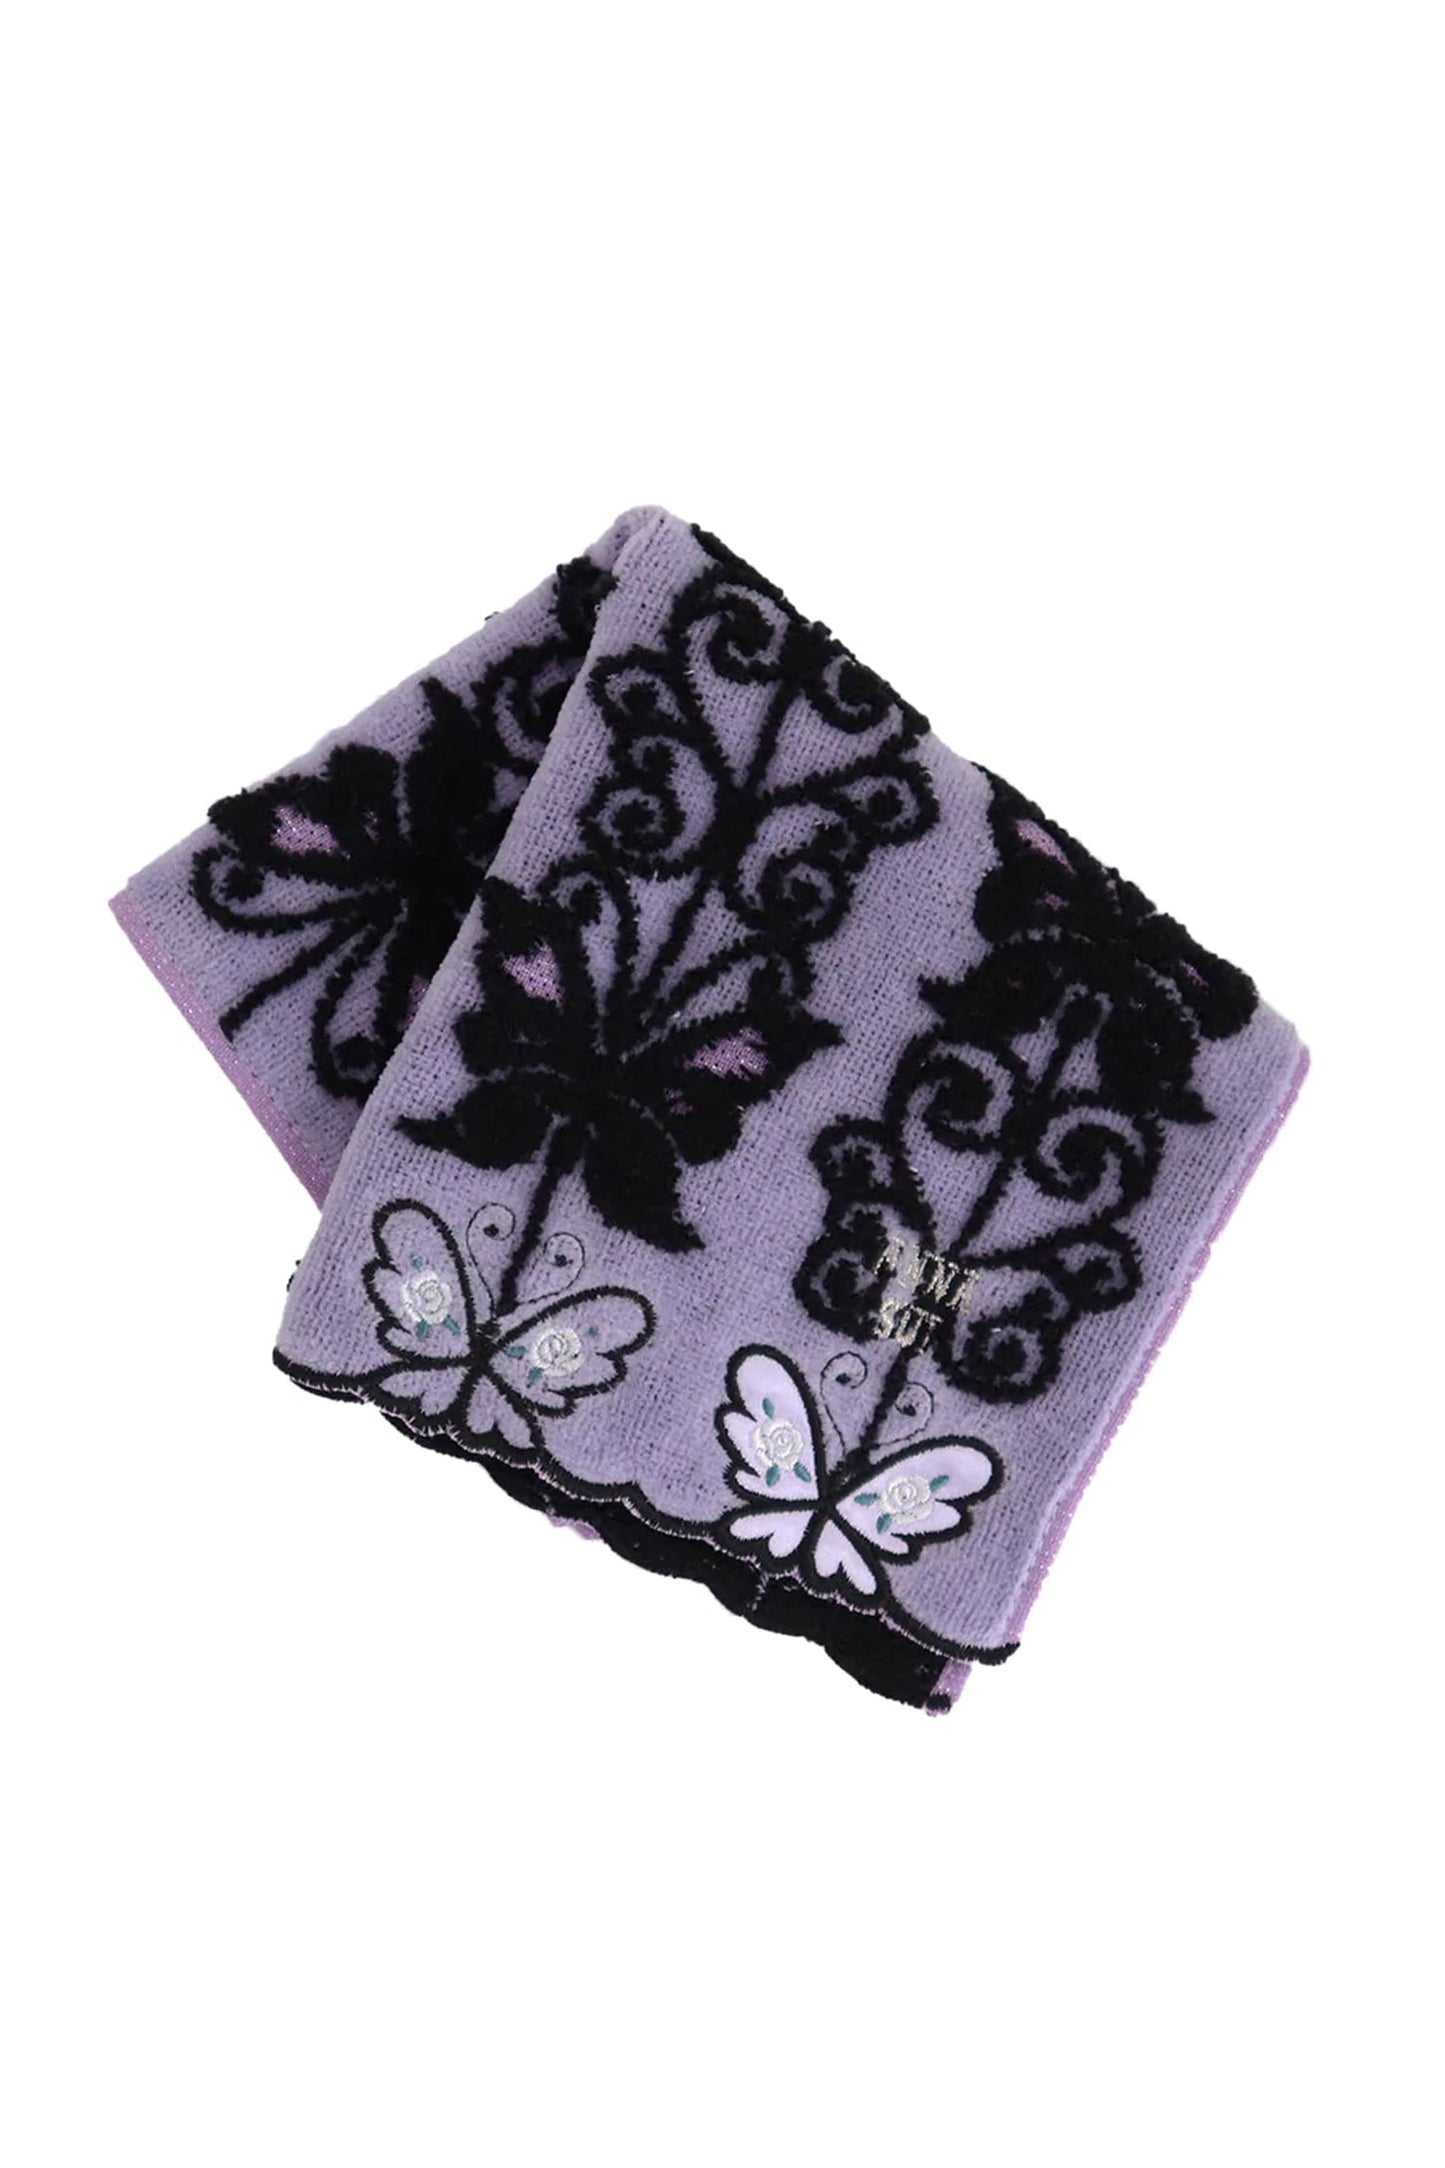 Butterfly Pattern Washcloth, 2 white butterflies and Anna Sui label in right corner